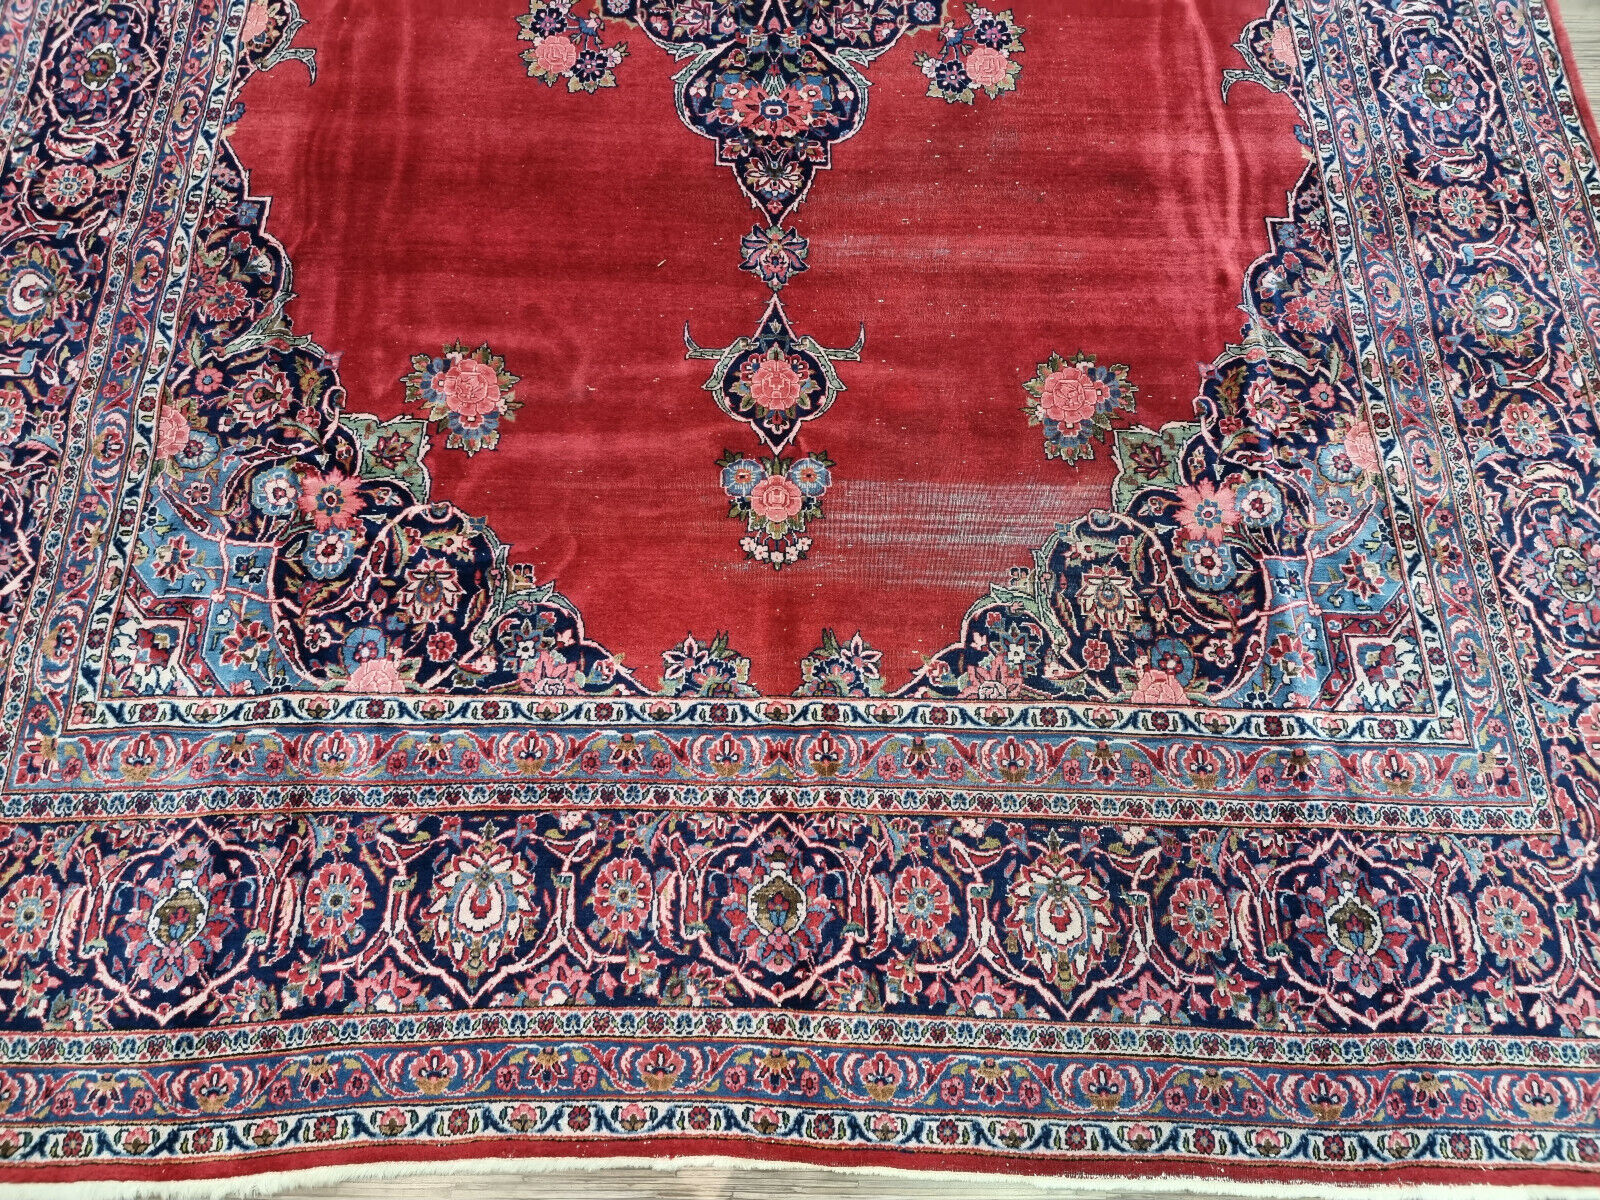 Intricate Floral Patterns on Handmade Antique Persian Kashan Rug - 1920s